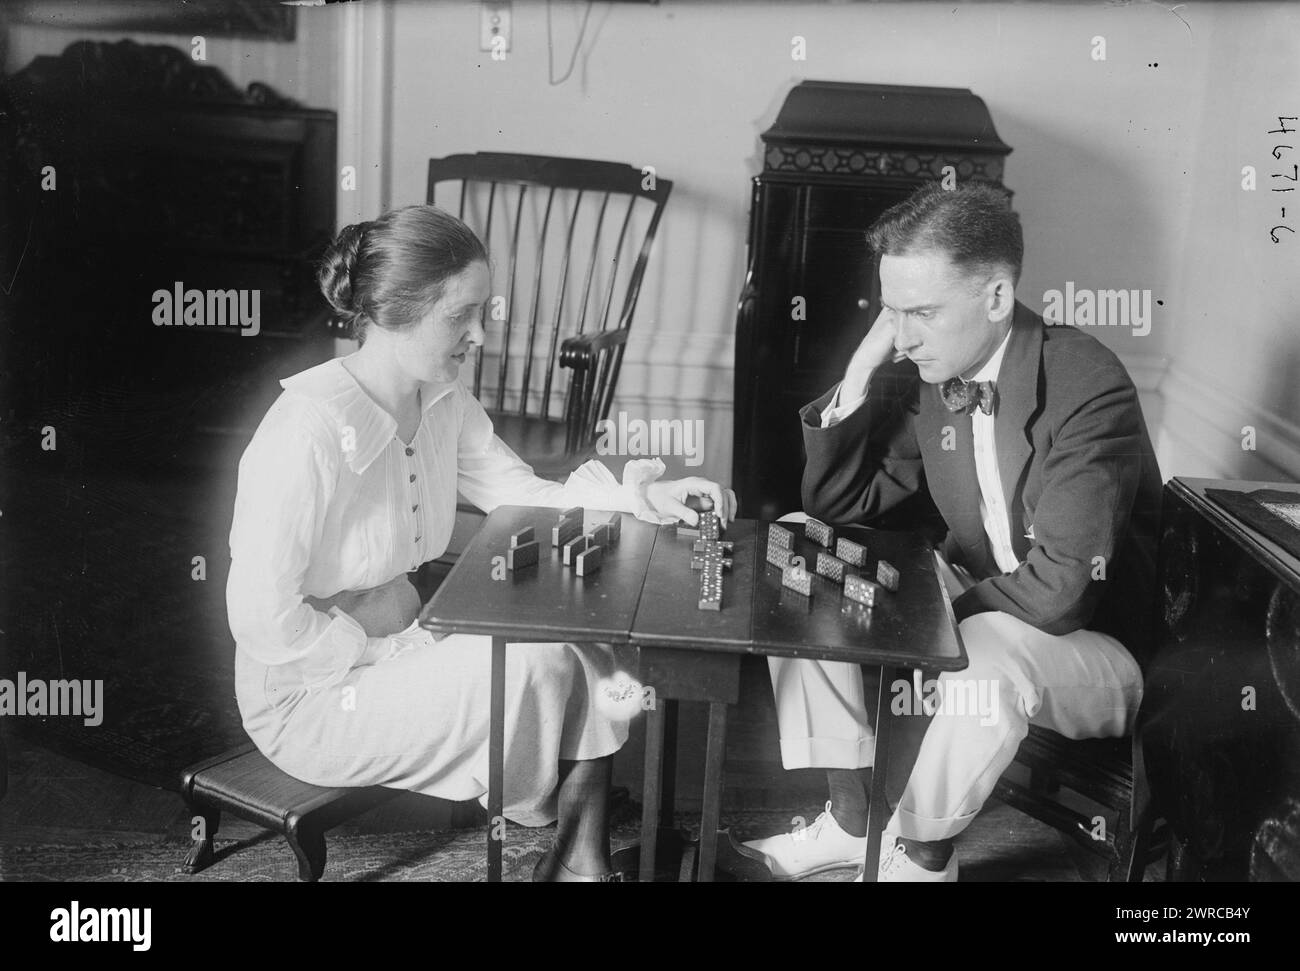 Elliott Shaw & wife, Photograph shows singer Elliott Shaw (1887-1973) with wife Abigail Schaulf Shaw (1889-1972) playing dominoes., between ca. 1915 and ca. 1920, Glass negatives, 1 negative: glass Stock Photo